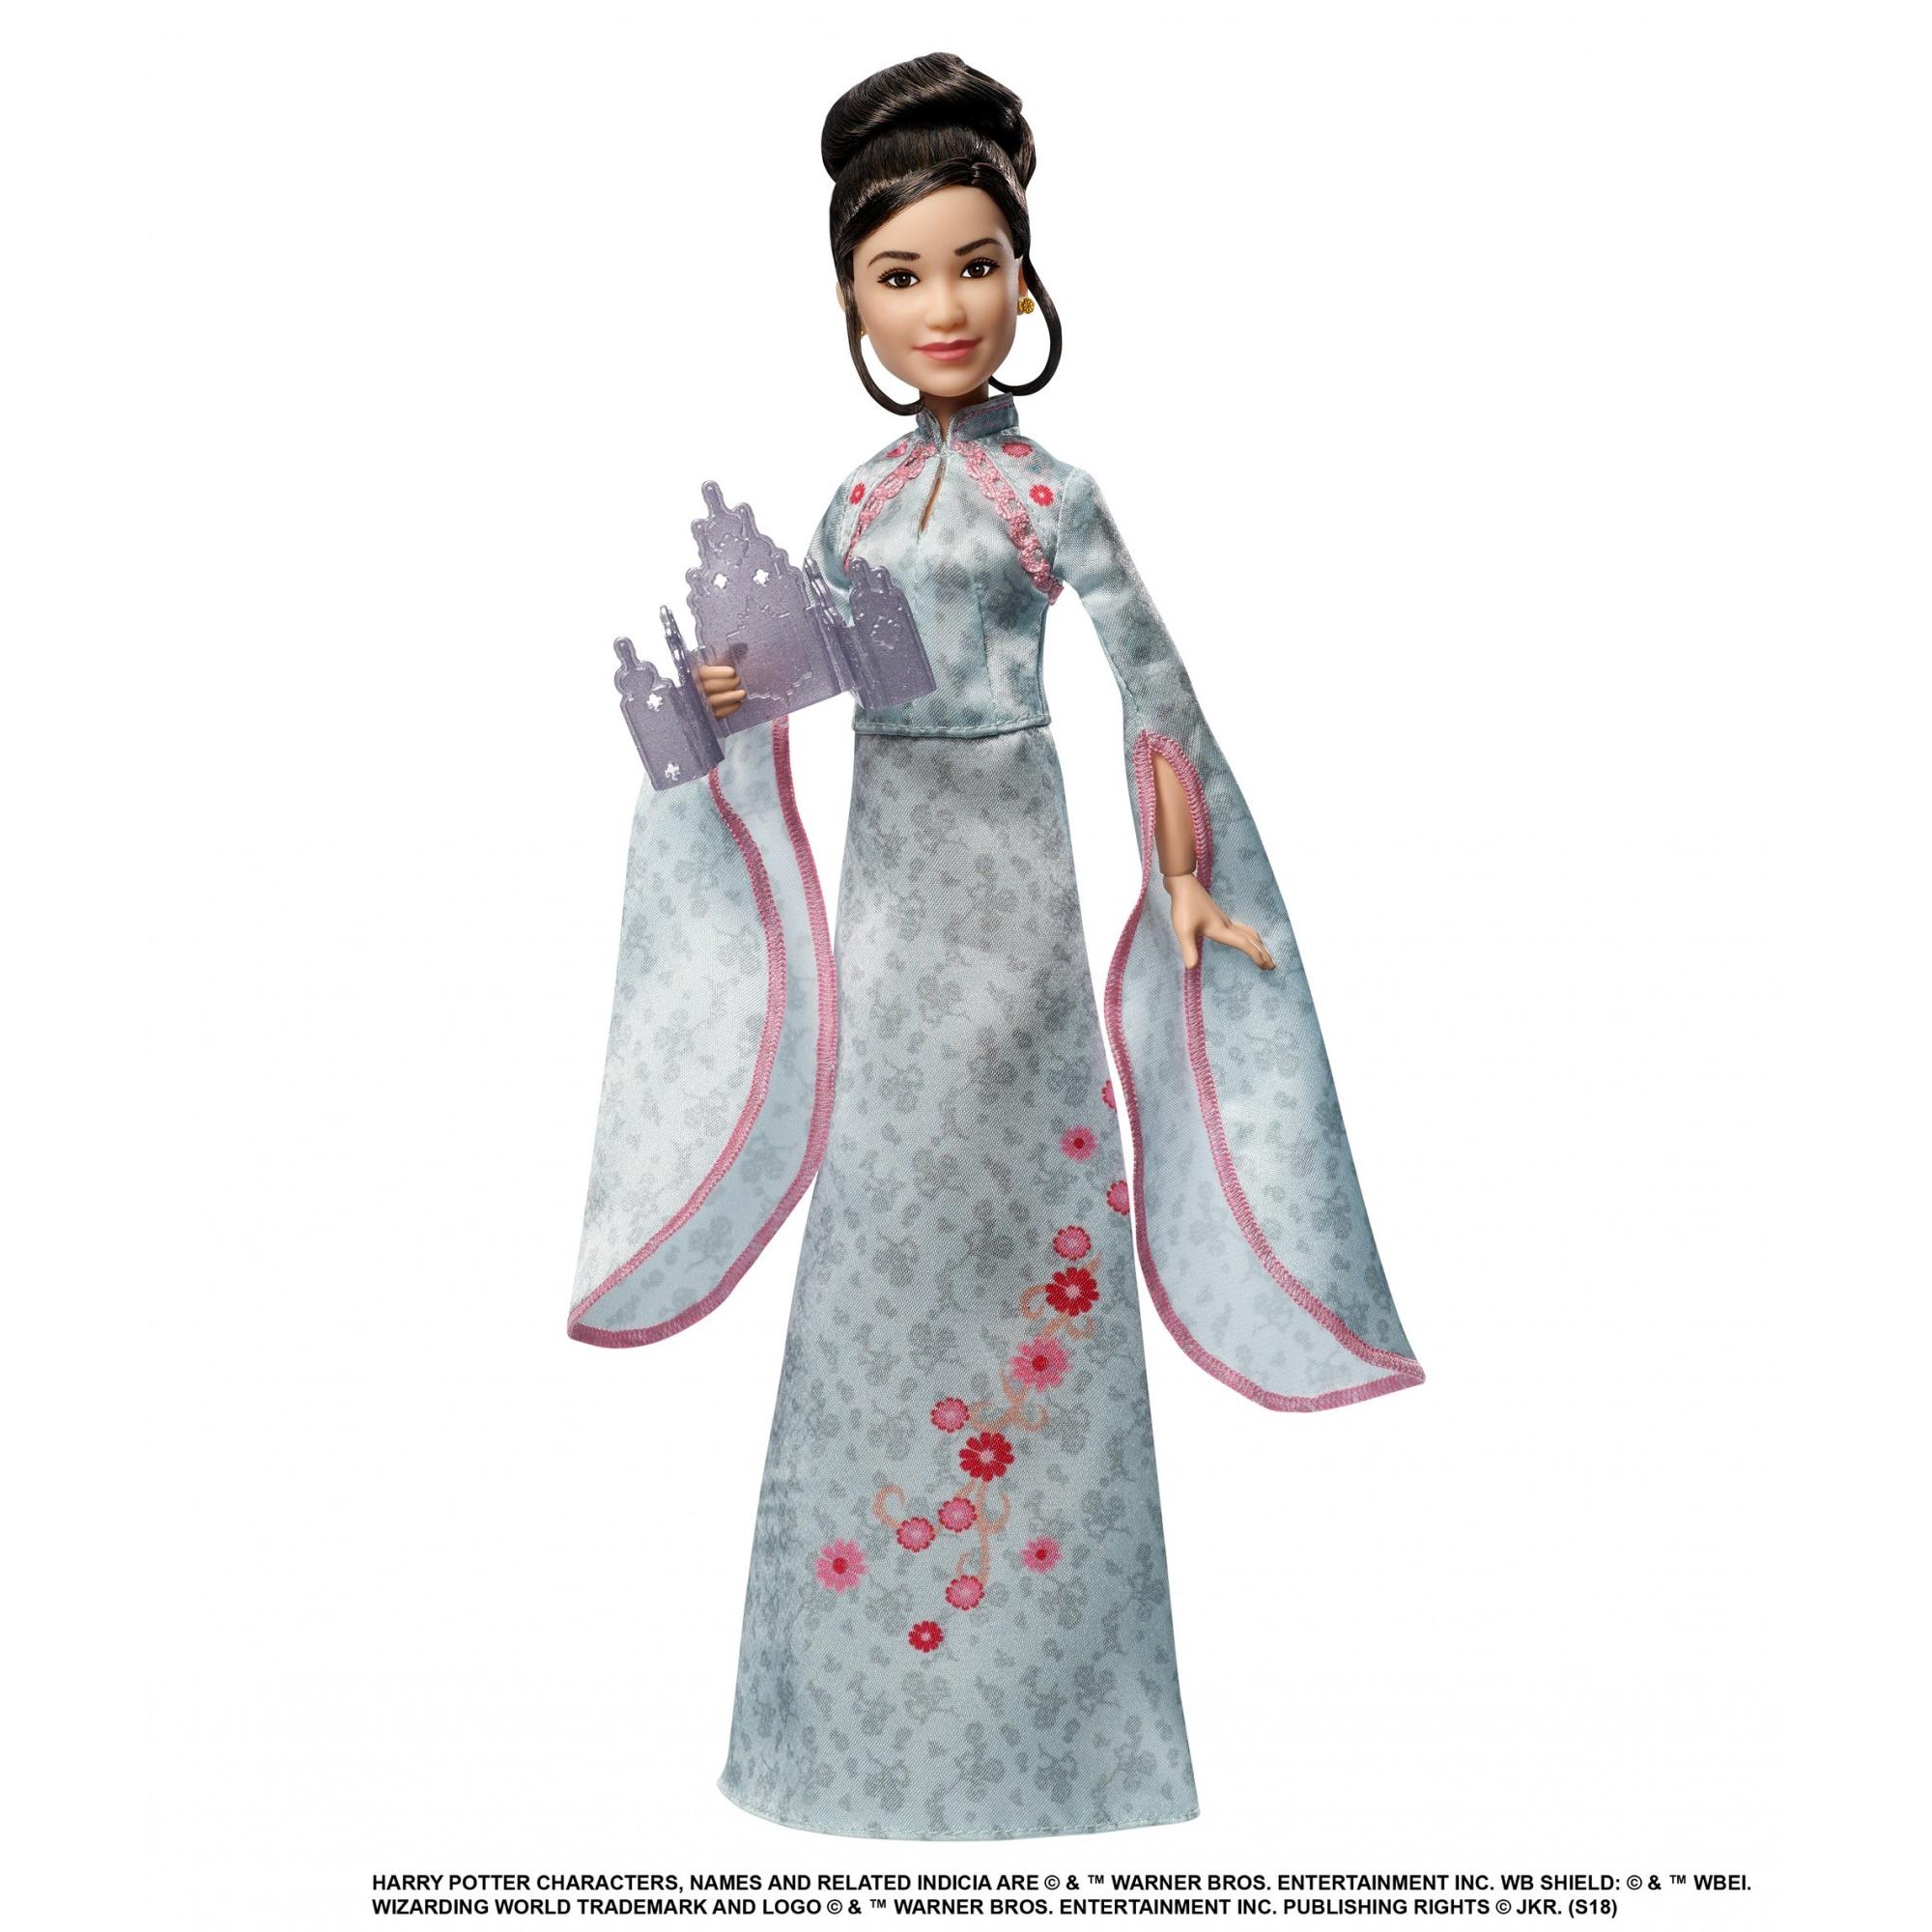 Harry Potter Cho Chang Yule Ball Doll with Film-Inspired Gown - image 1 of 6